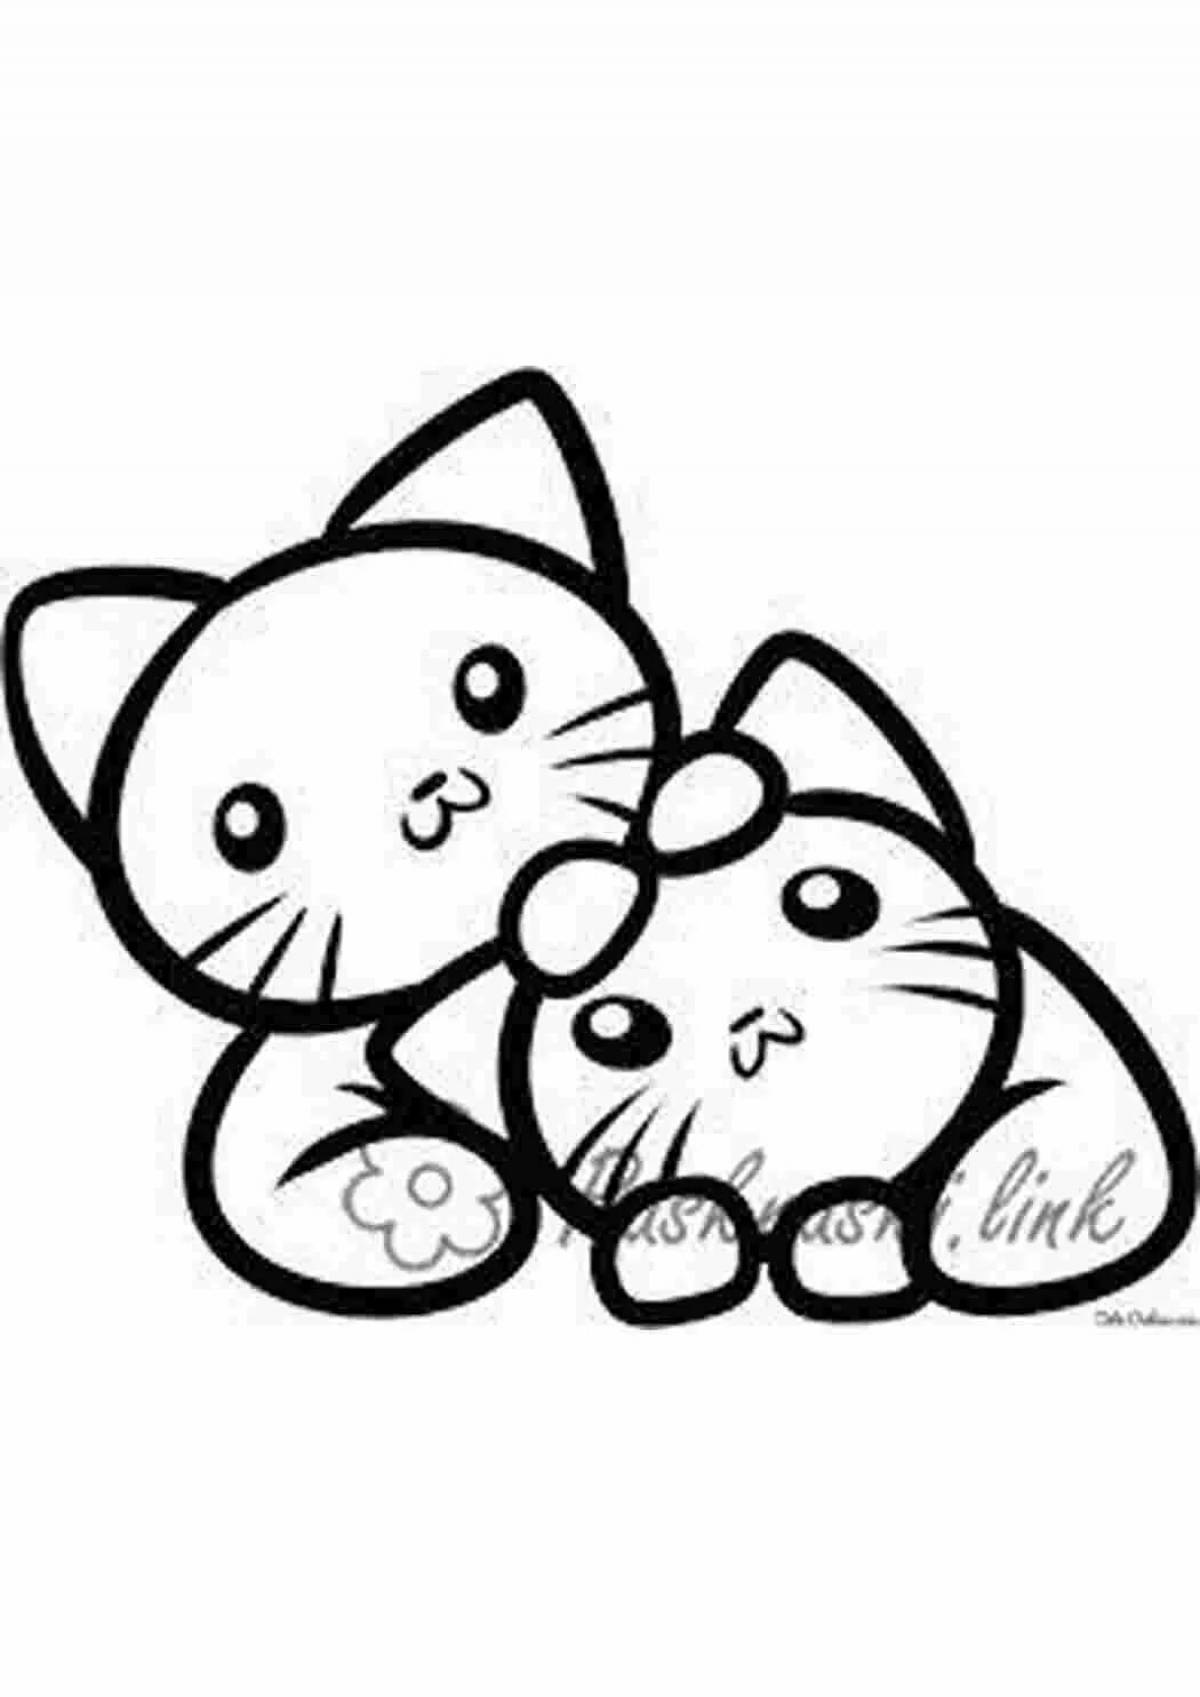 Adorable and magical cat coloring page for kids